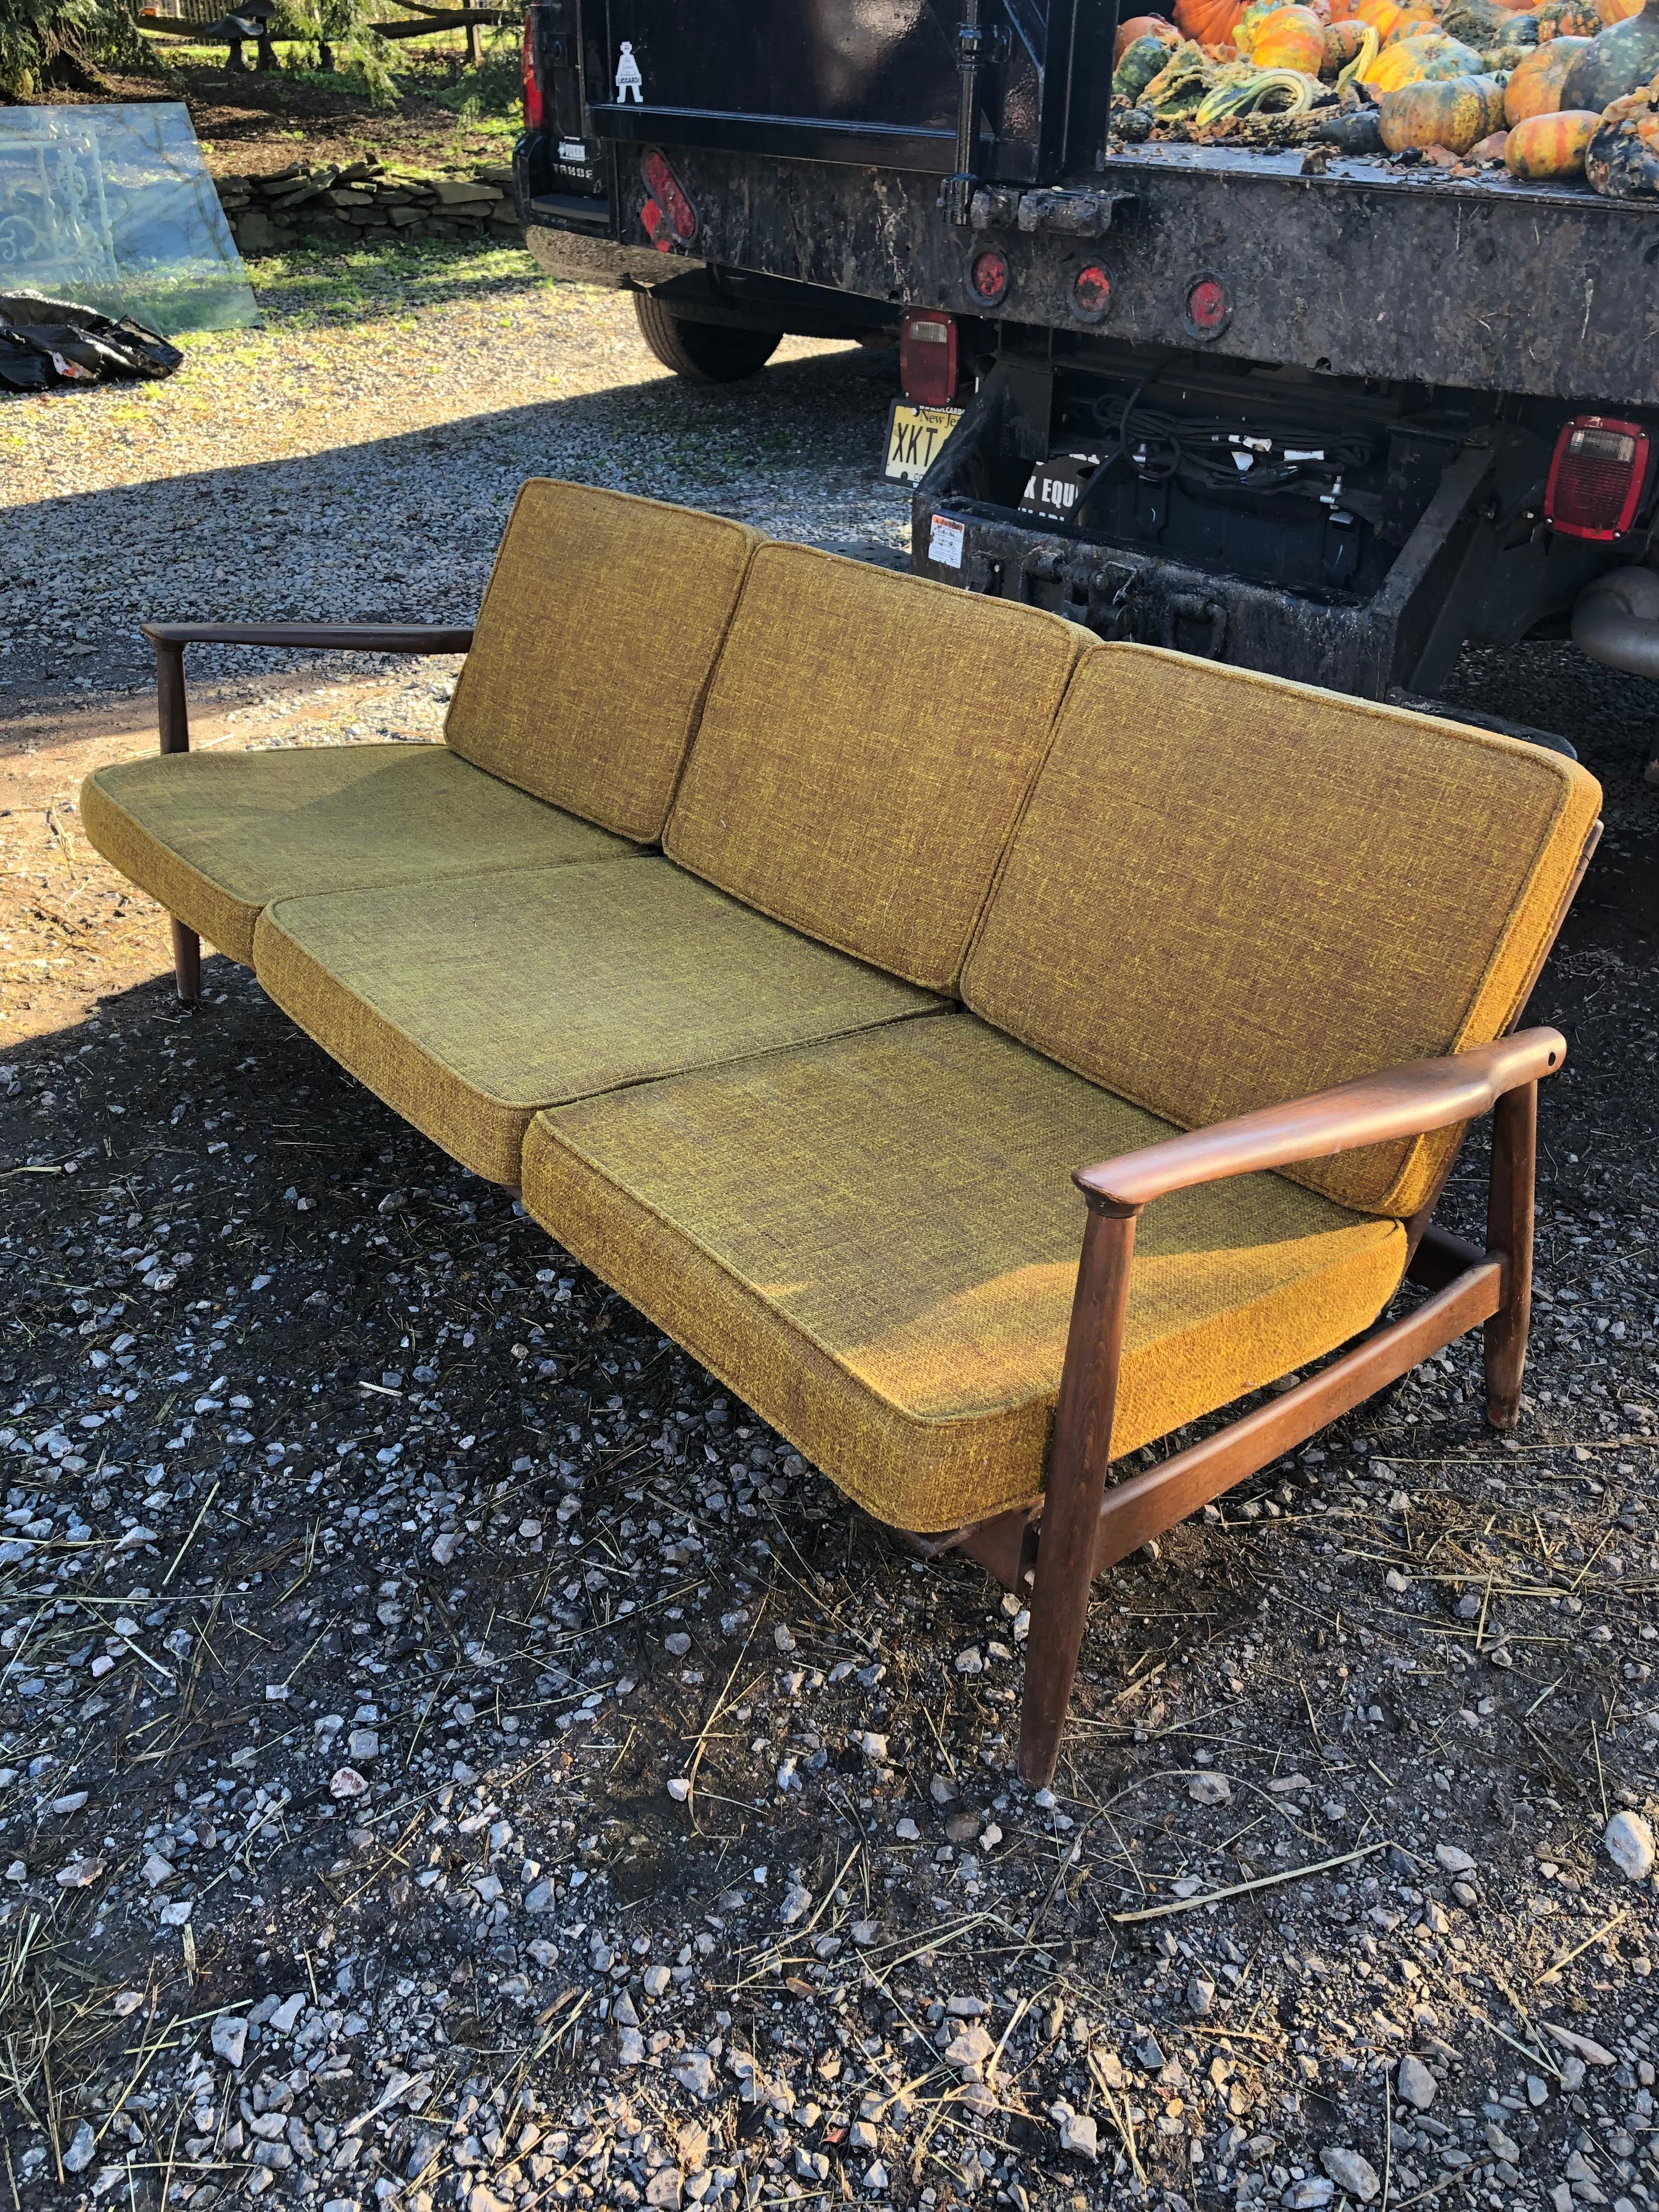 Sleek mid century modern wooden sofa with great bones that looks like it's right off the set of Mad Men.  Recommend seat cushions be used as templates for replacement cushions.  
seat height without cushion 12